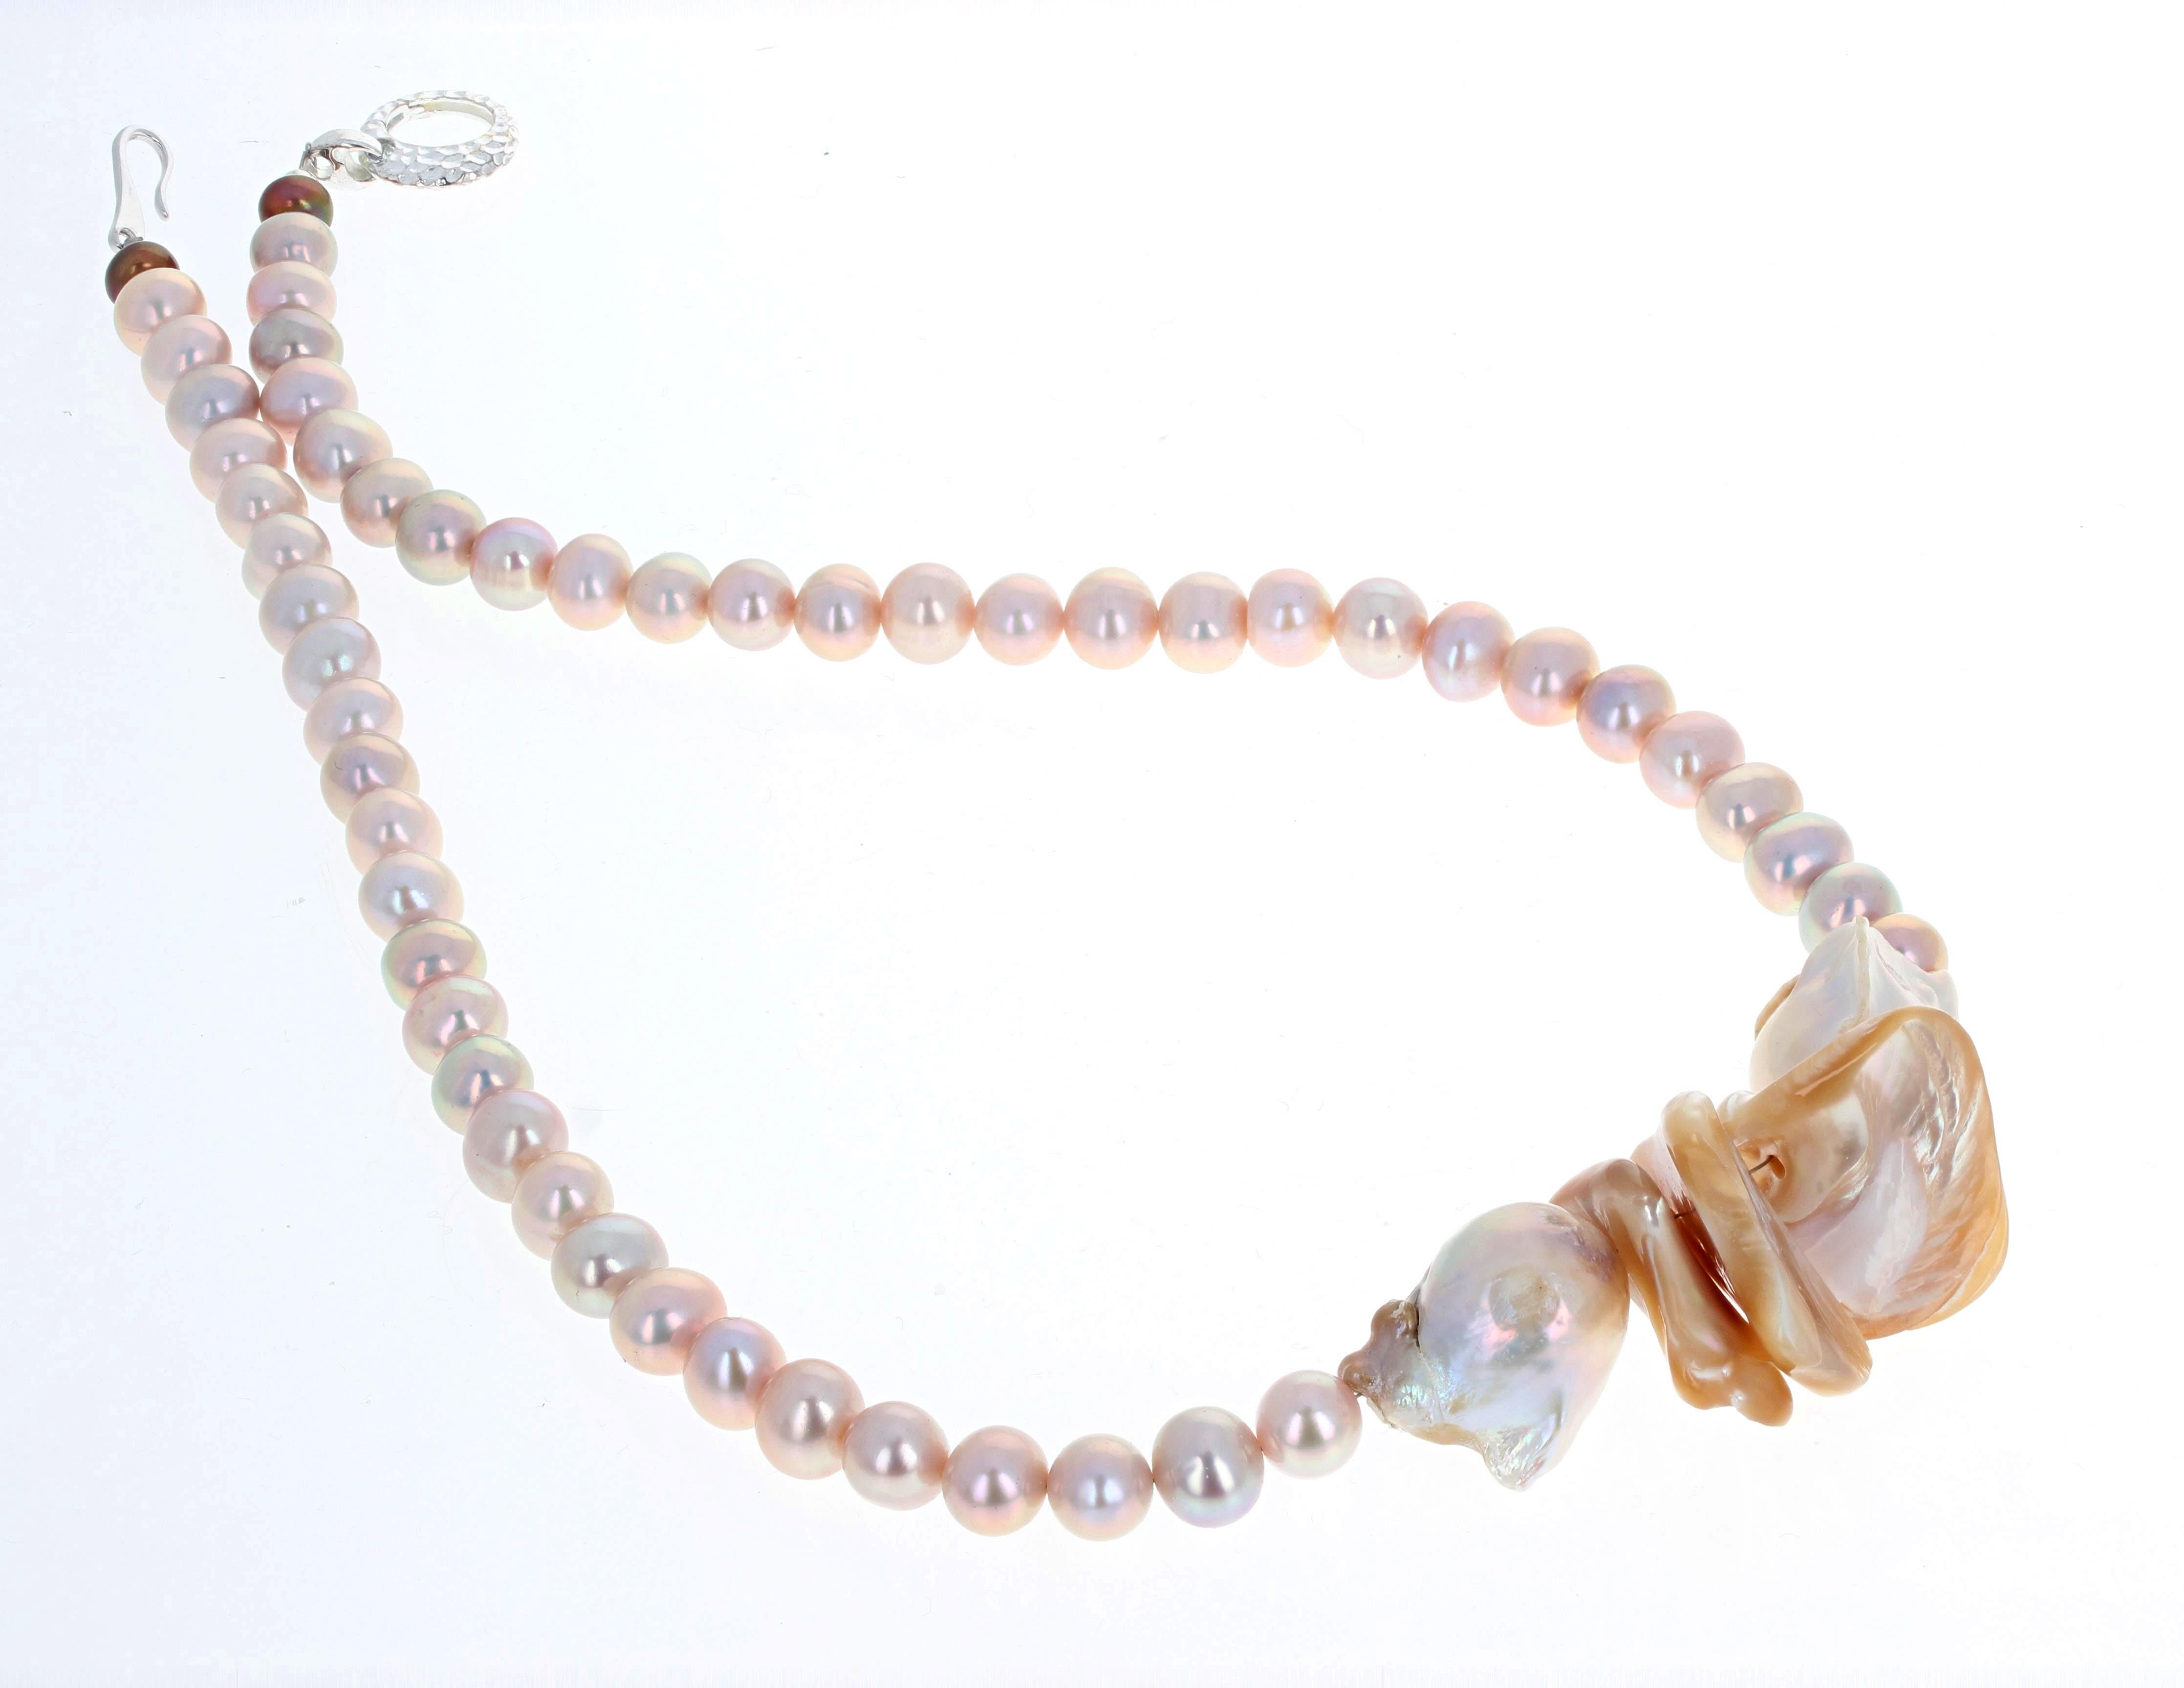 Uncut AJD Dramatic Pinky Cultured Pearls & Goldy Pearl Shells Artistic Necklace